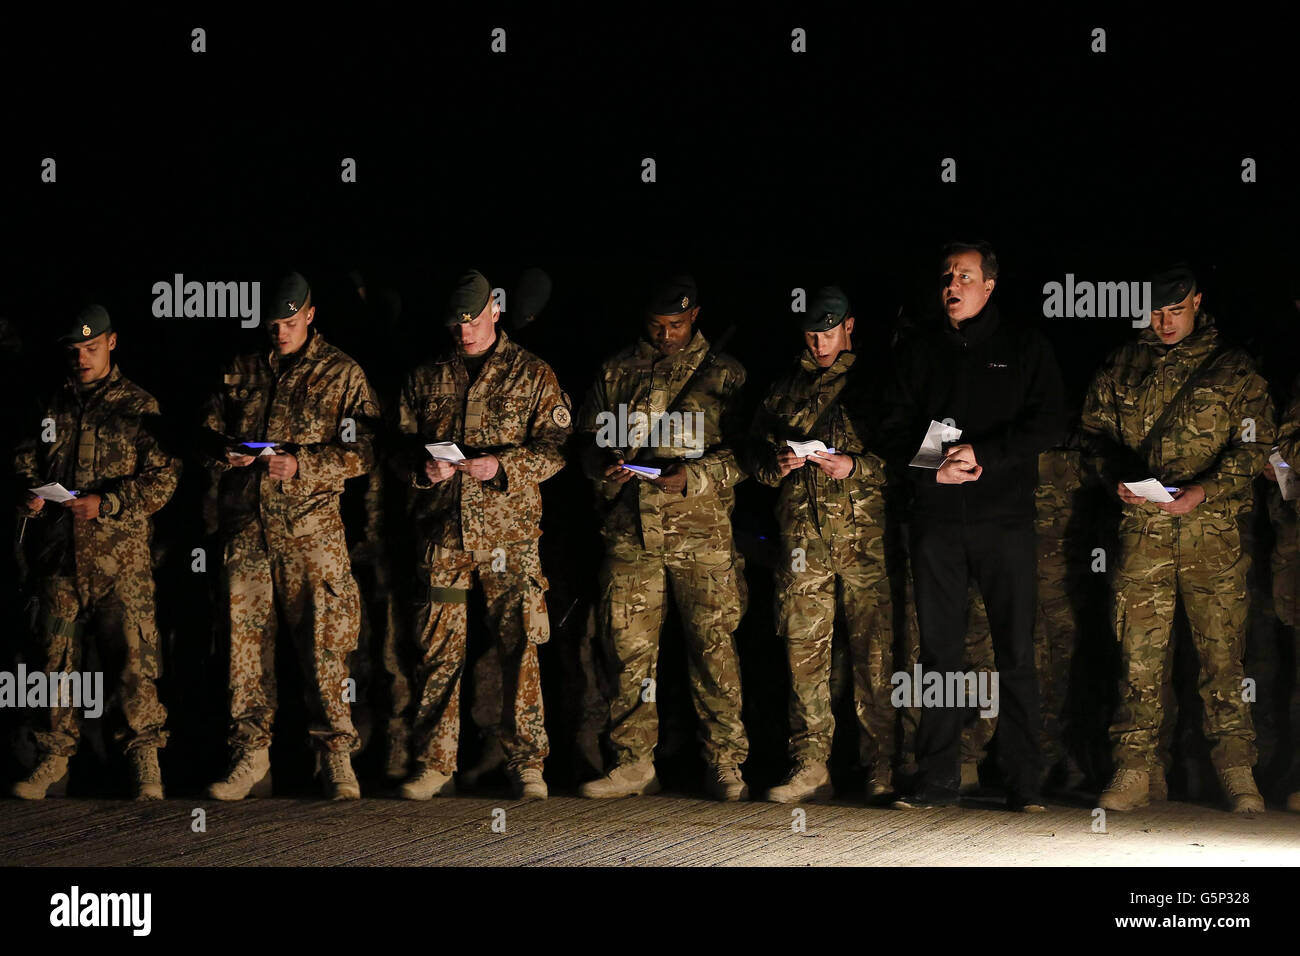 Prime Minister David Cameron attends a carol service with British soldiers, as well as Danish and Bosnian soldiers, during a visit to Forward Operating Base Price in Helmand Province, Afghanistan . Stock Photo